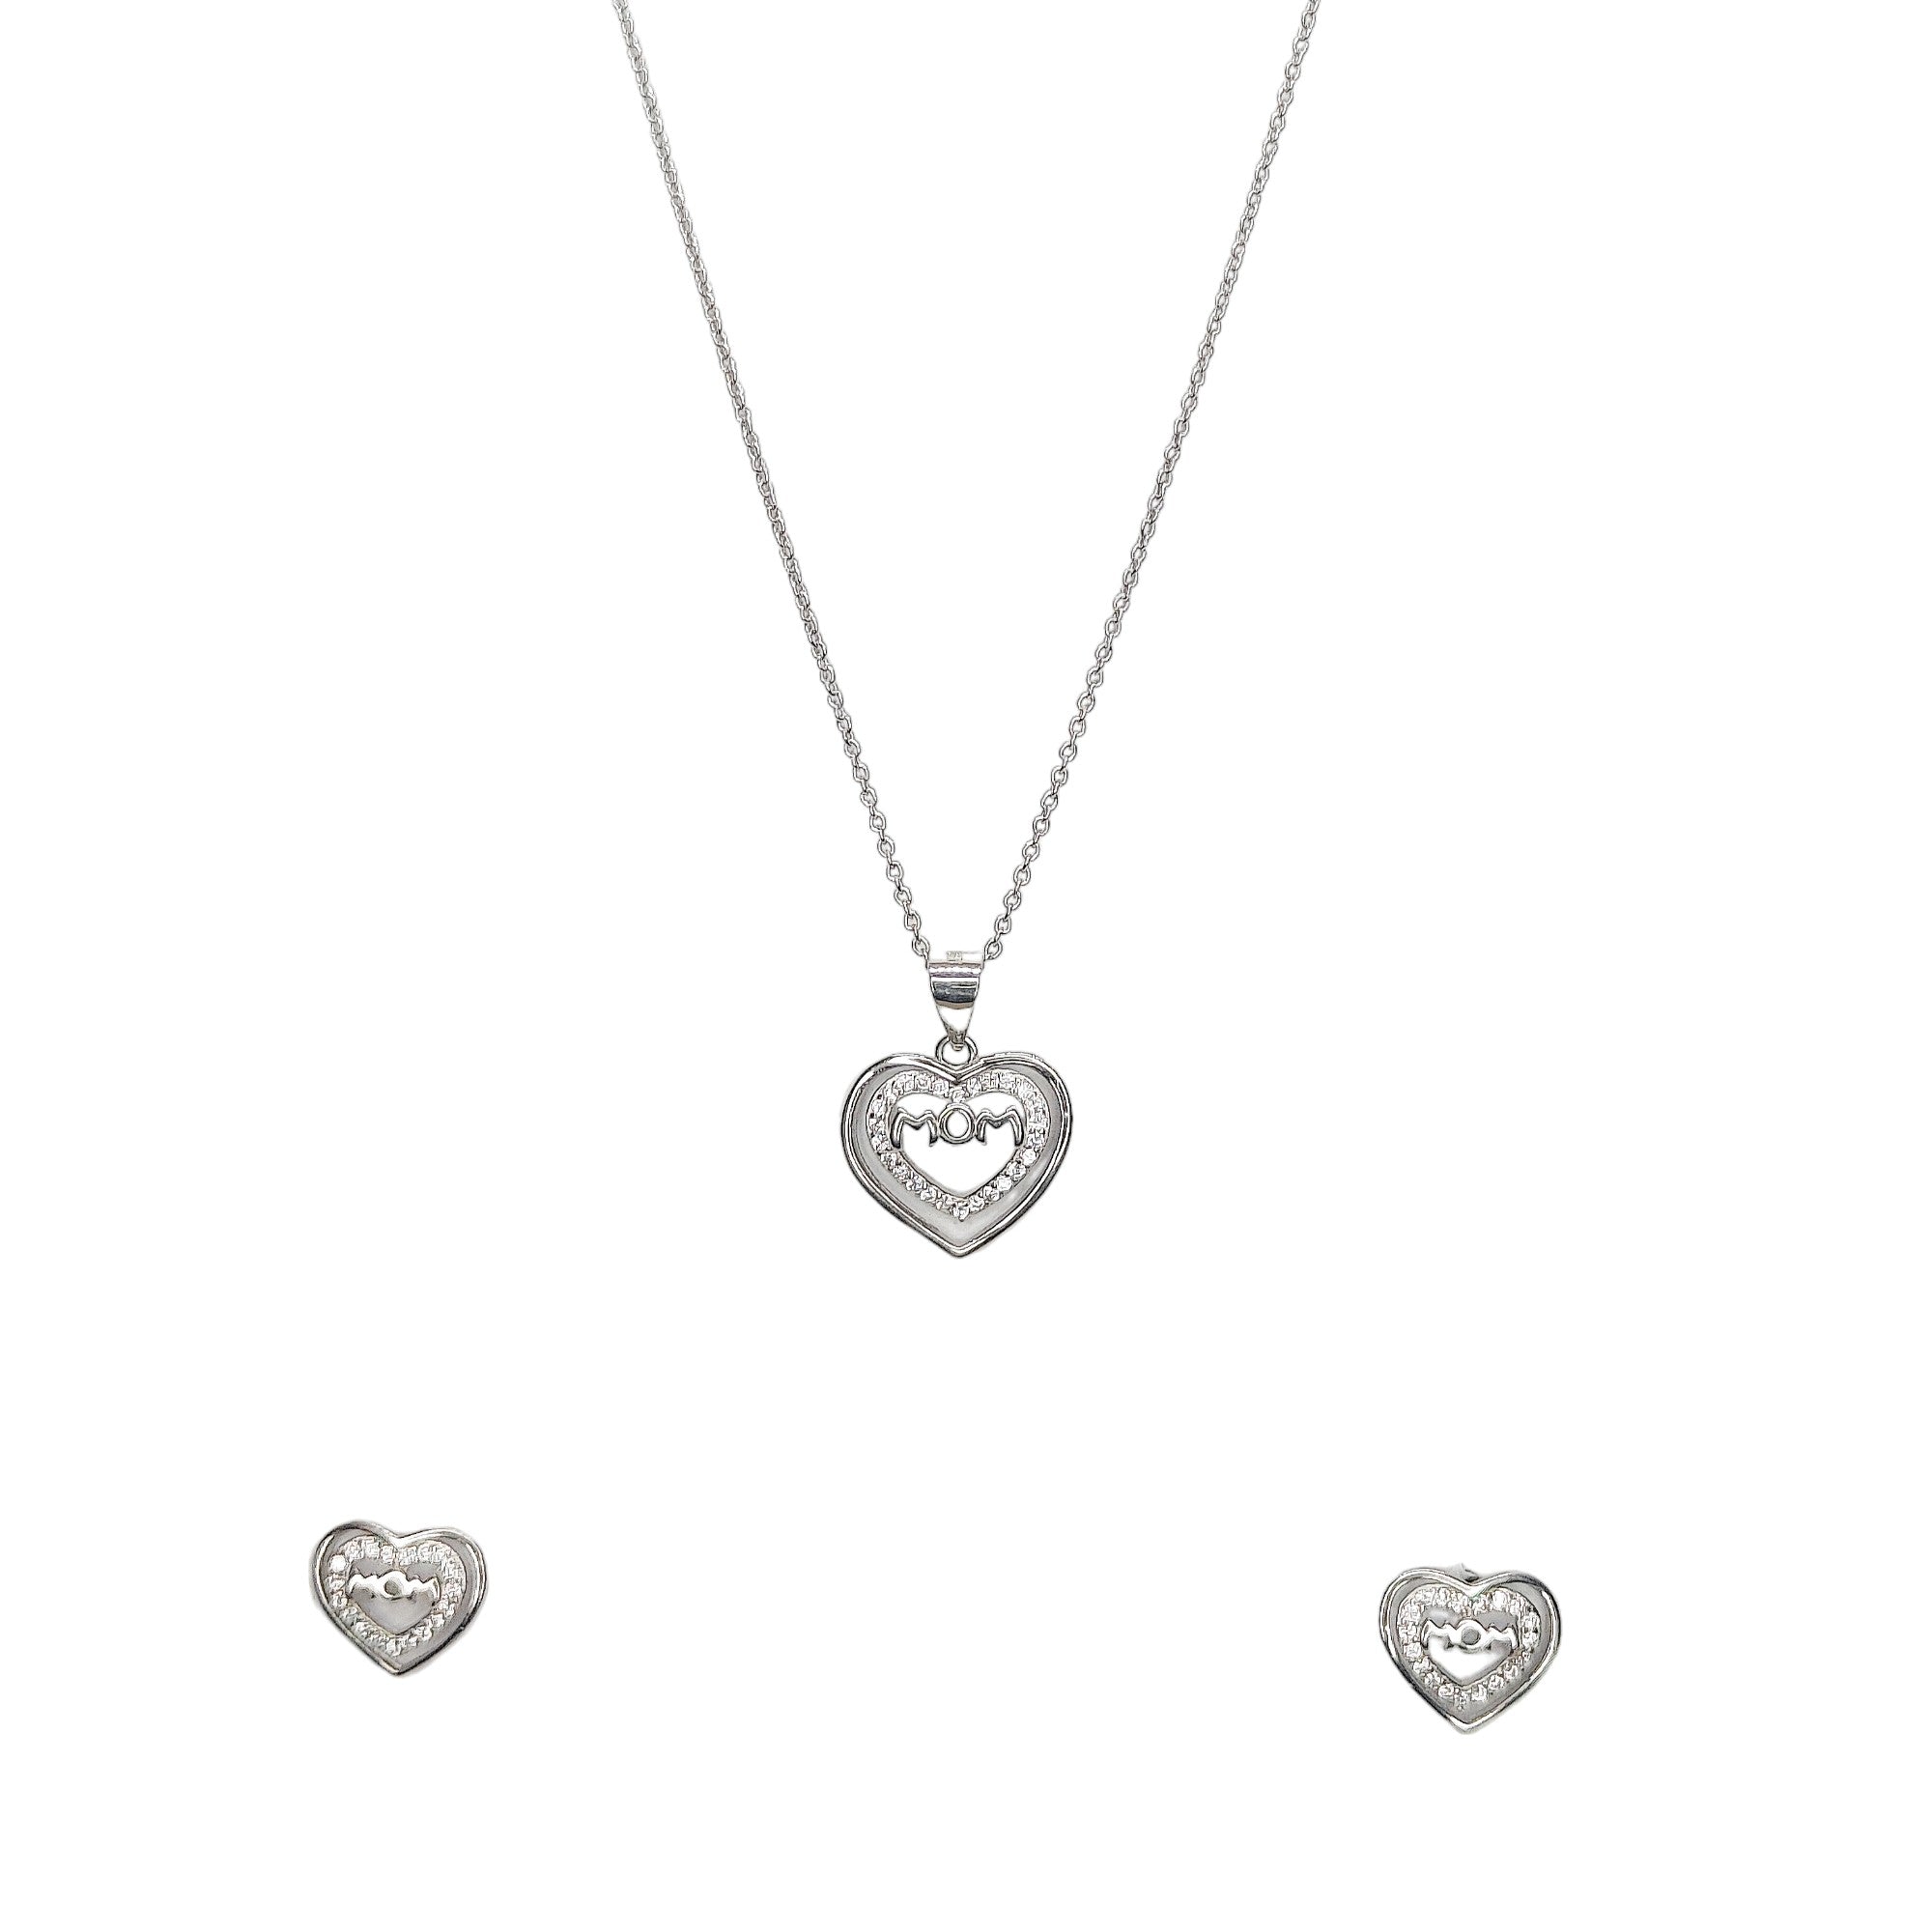 The Mom- Silver Pendent Set With Chain for Women - Rivansh